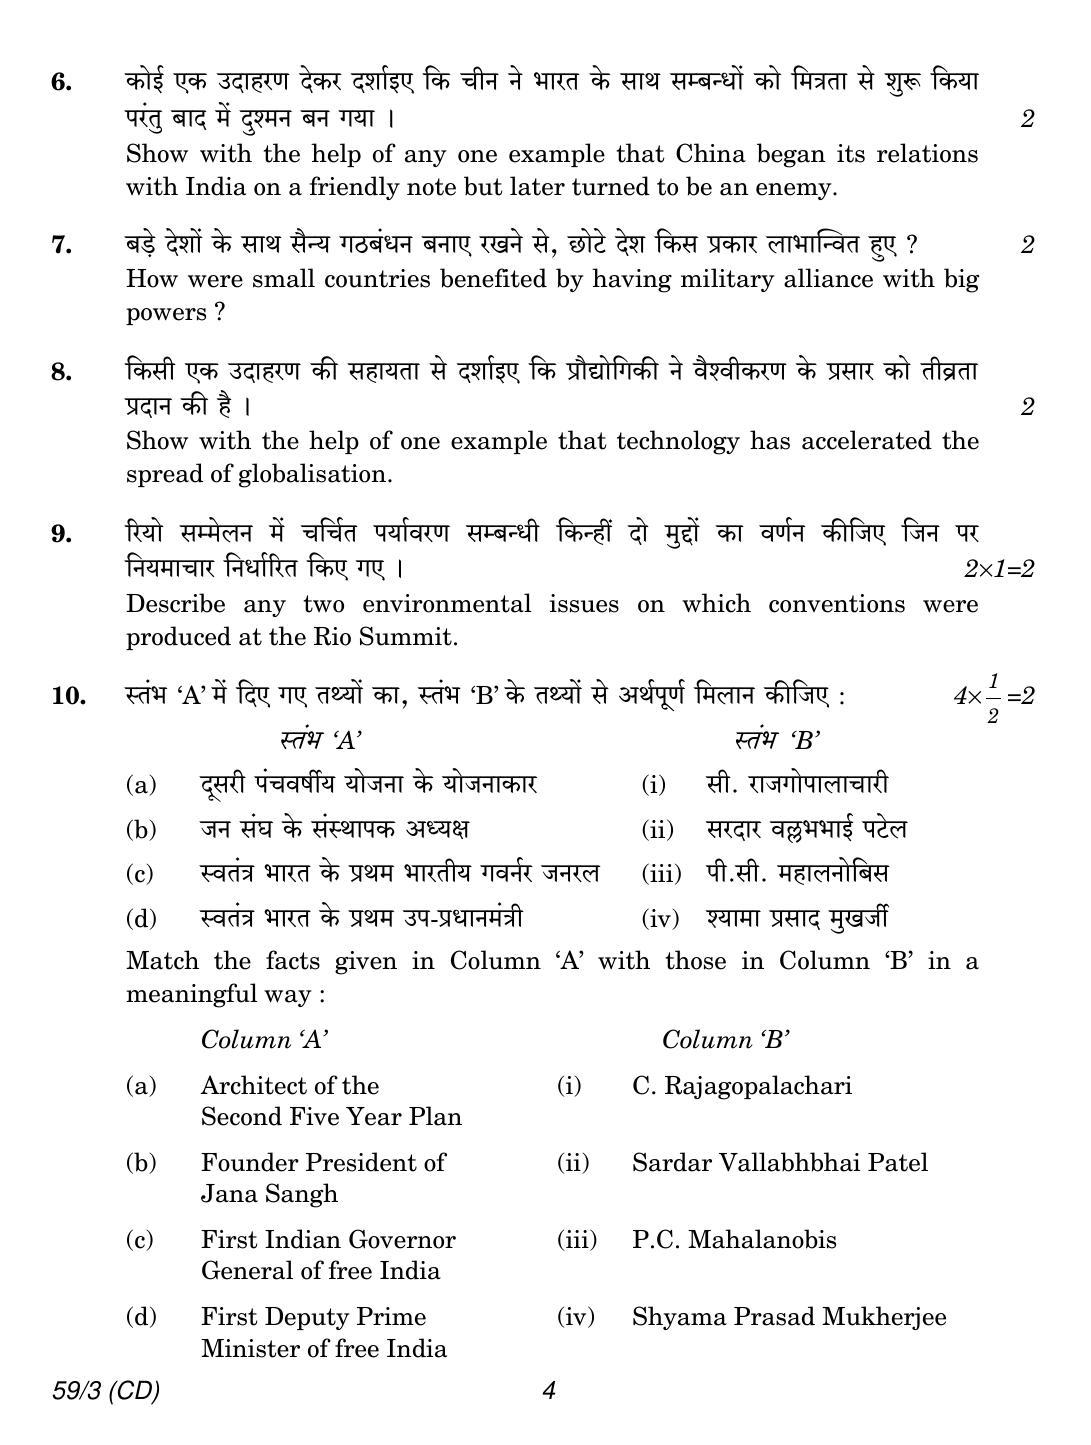 CBSE Class 12 59-3 POLITICAL SCIENCE CD 2018 Question Paper - Page 4